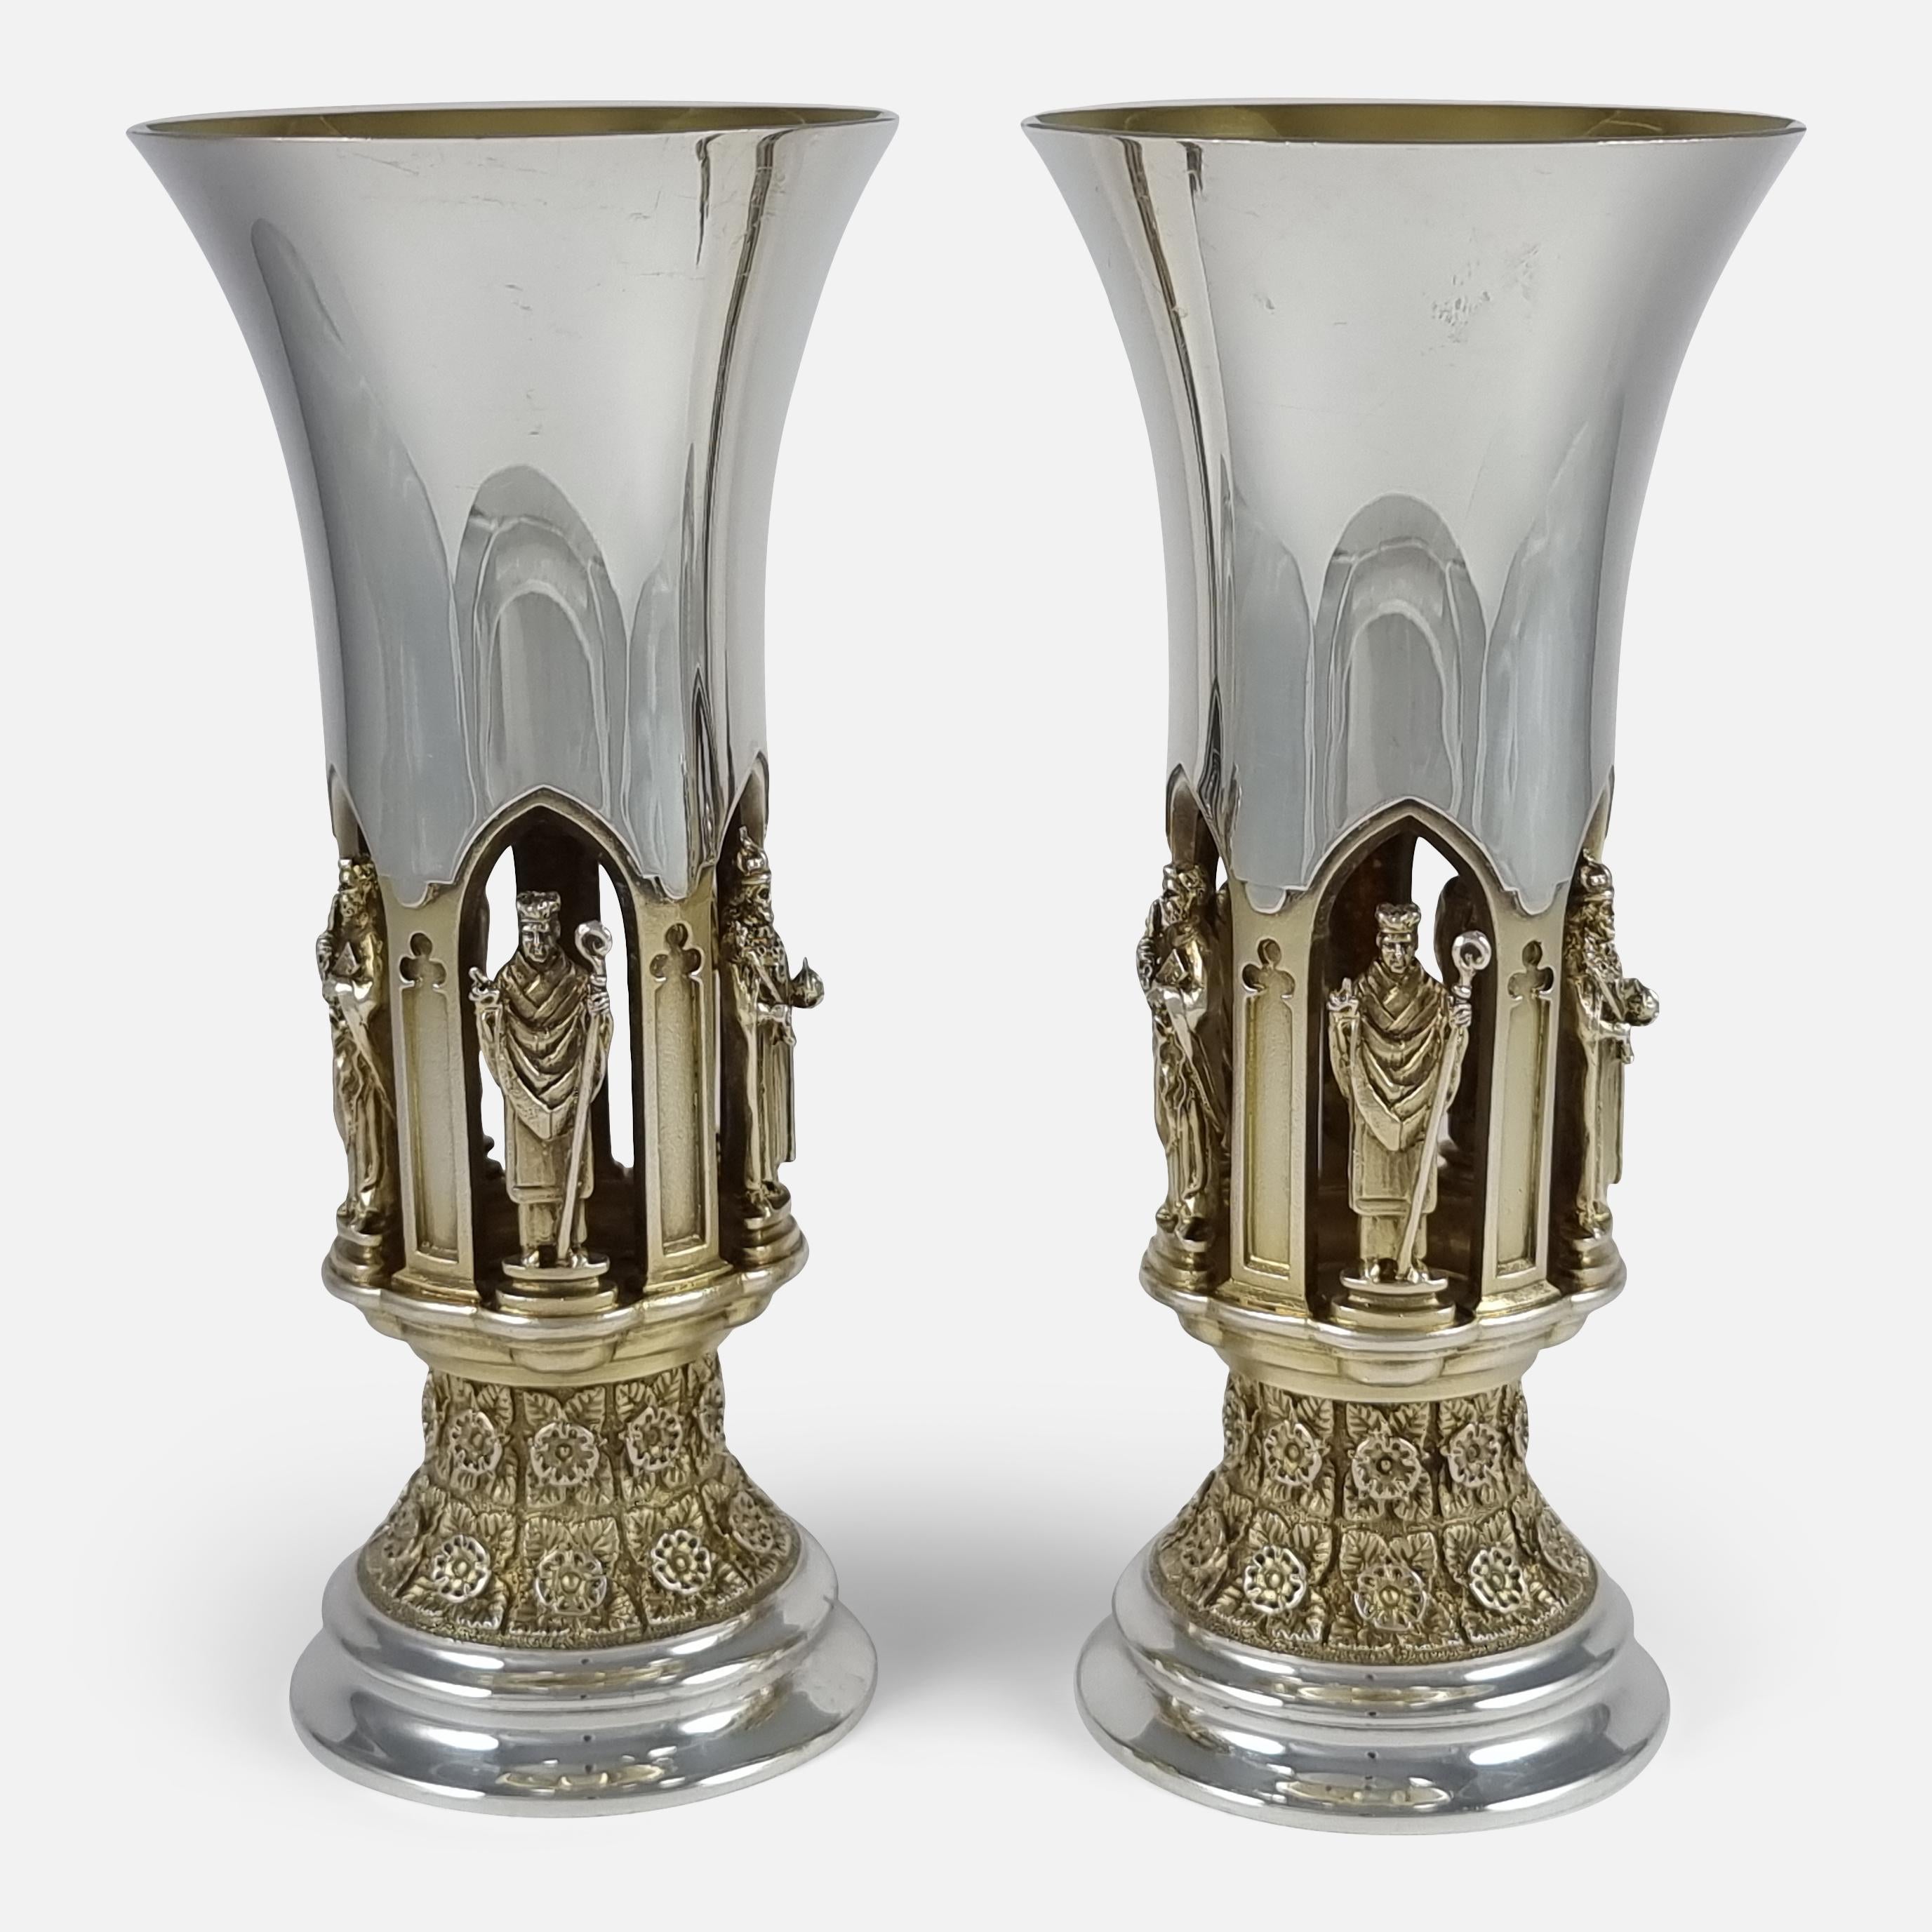 British Pair of Aurum Silver Gilt 'Ripon Diocese Foundation' Goblets by Hector Miller